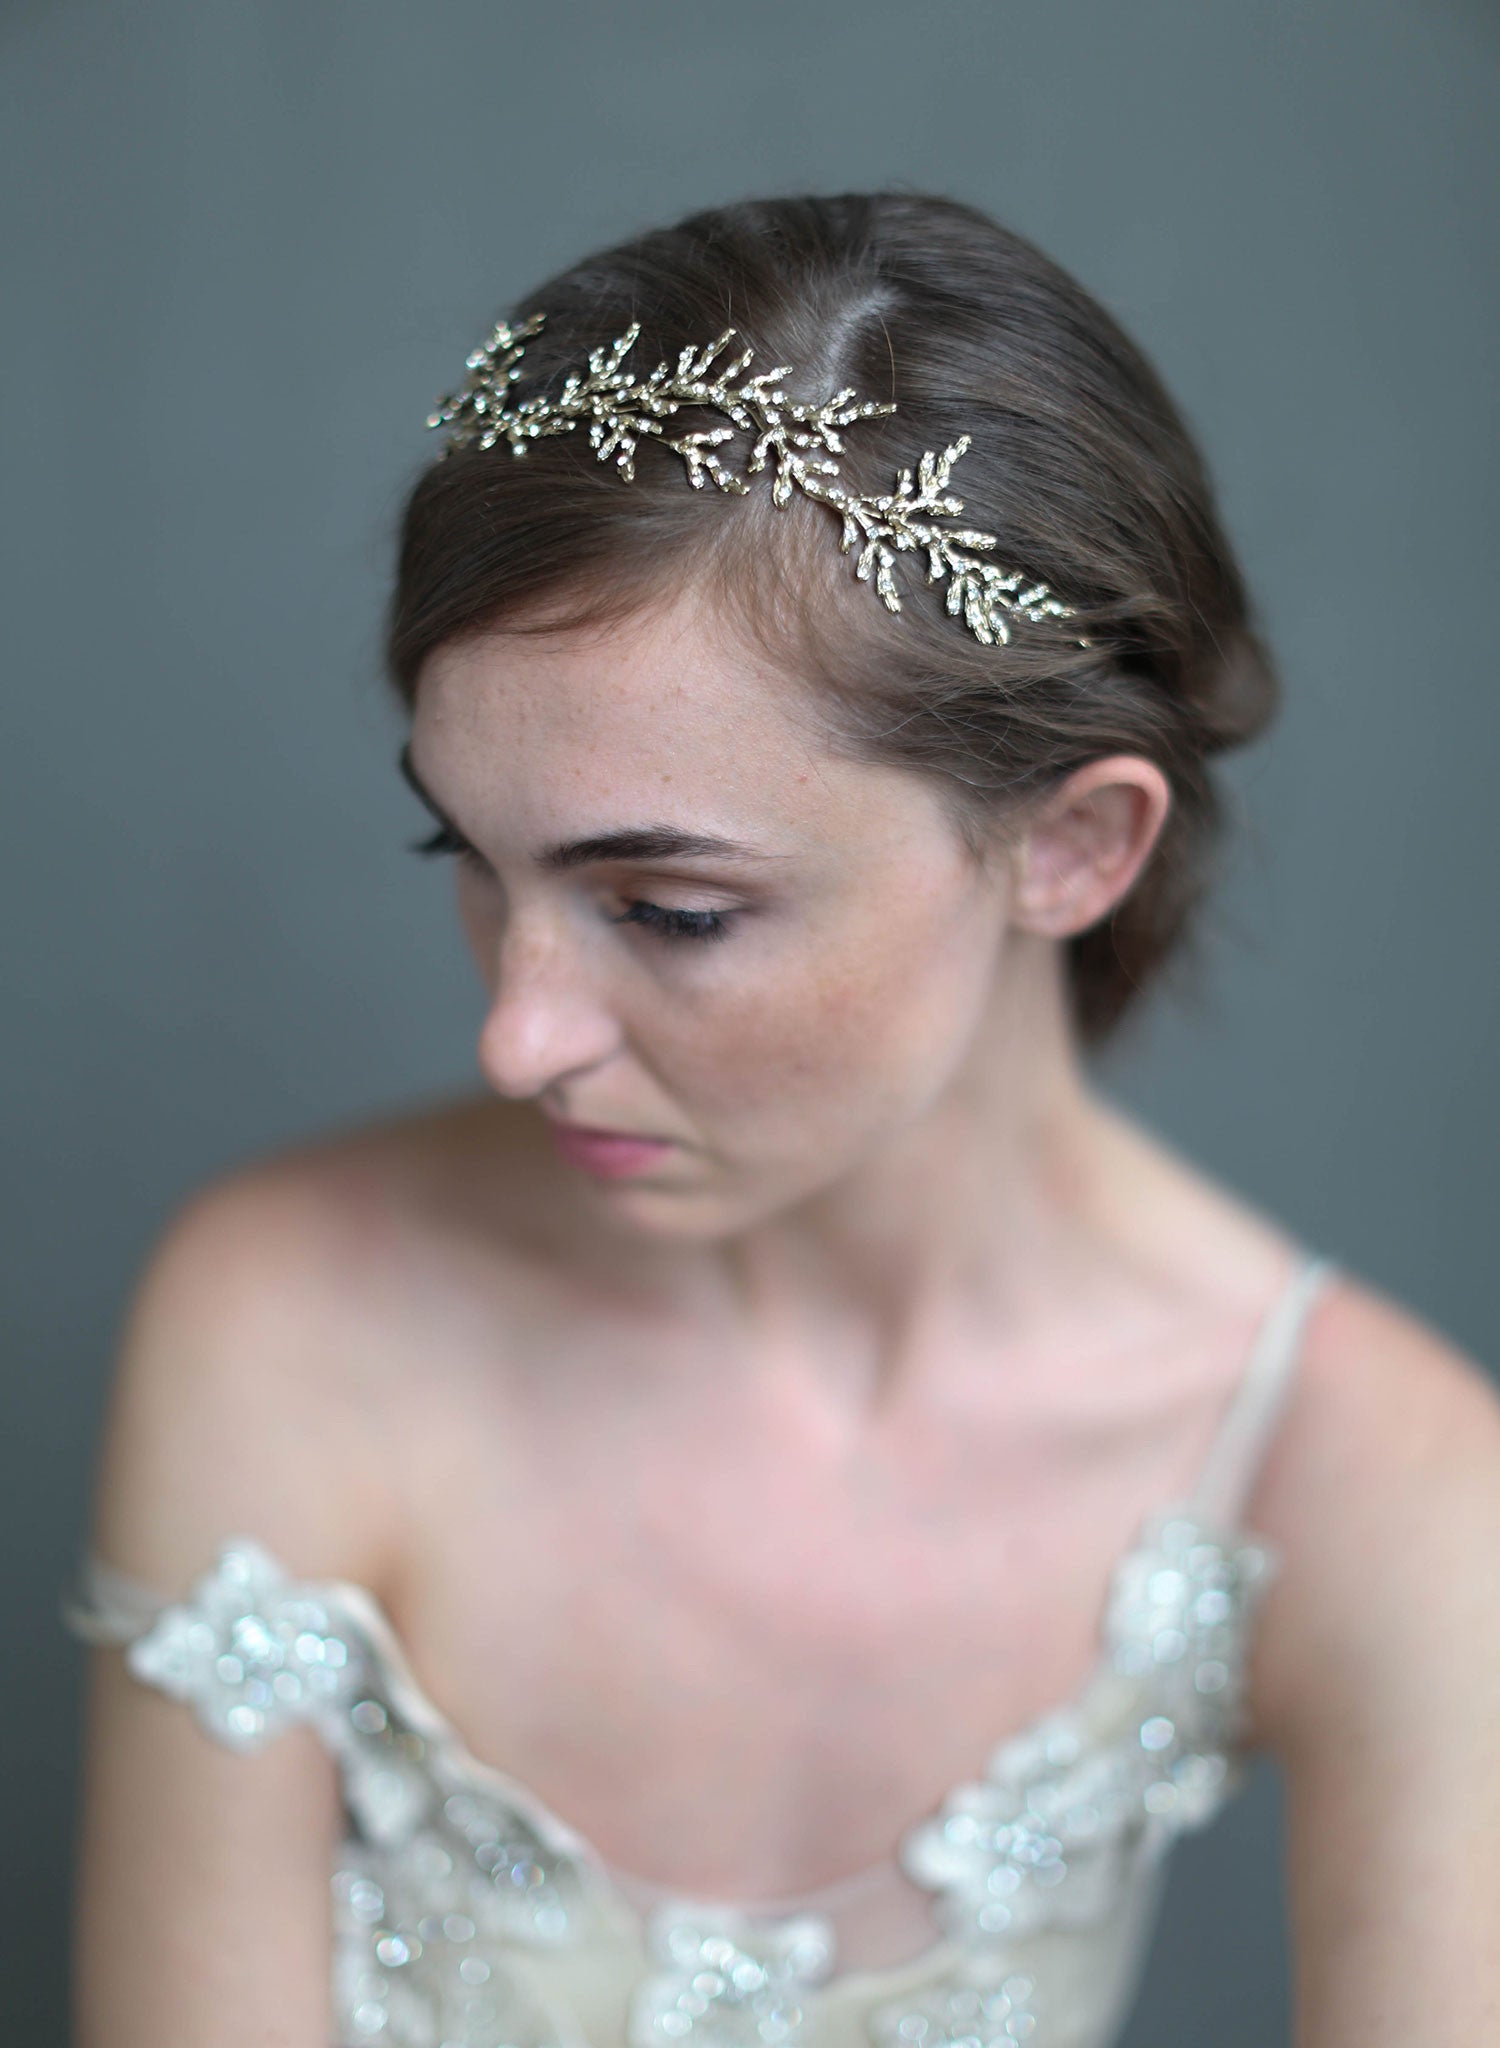 Gilded crystal encrusted branch headpiece - Style #707